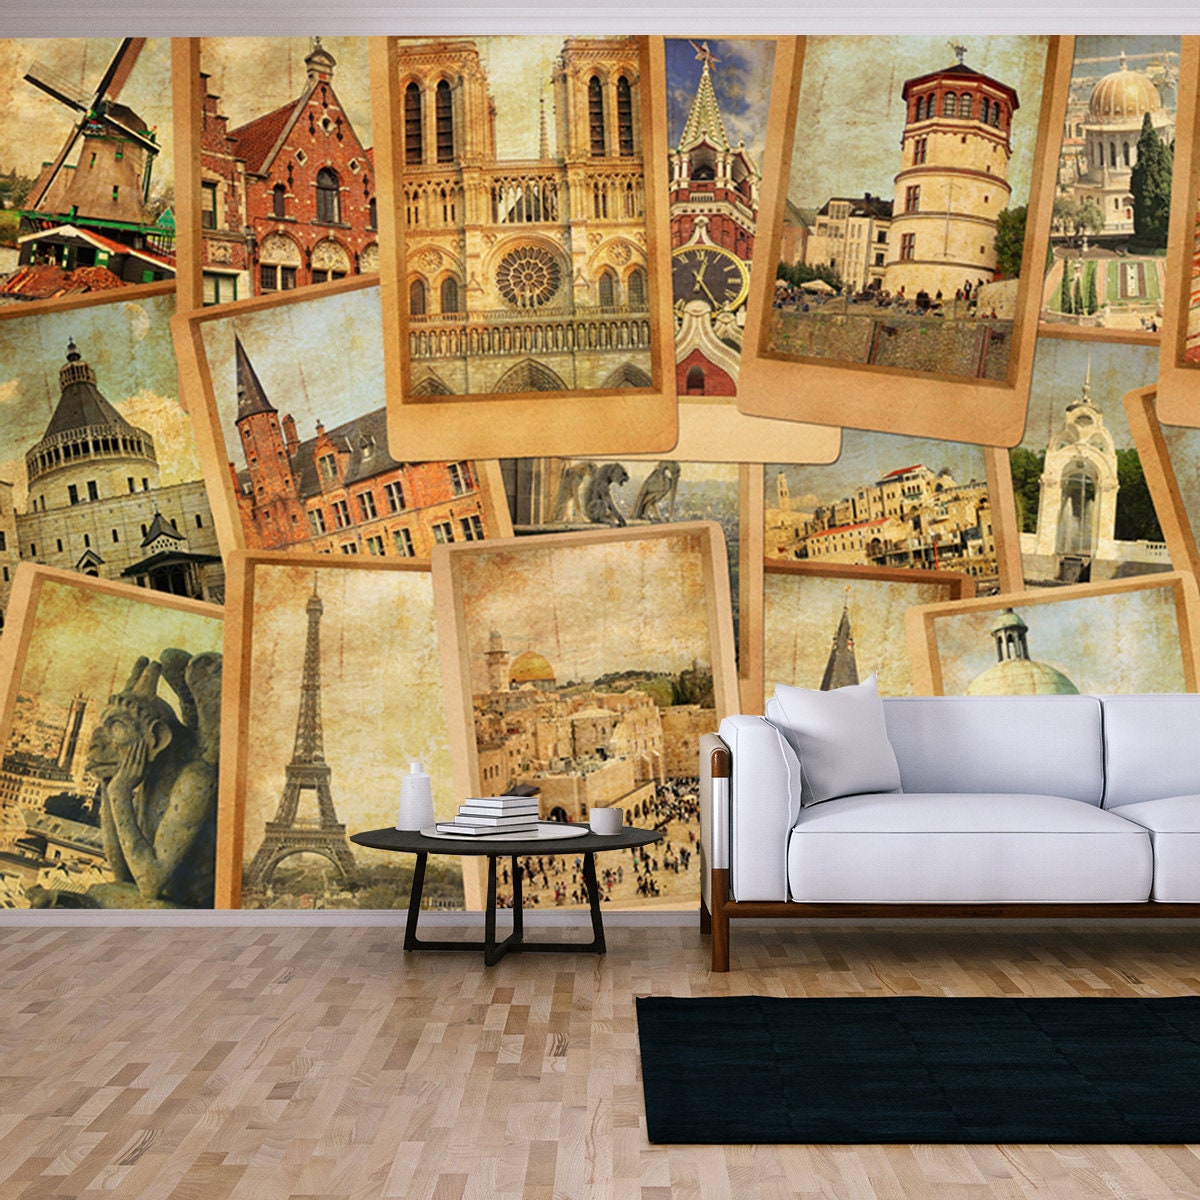 Vintage Photo Cards Collage. European, Middle East, Canada and Russia Travel. World Tourism Concept Wallpaper Living Room Mural